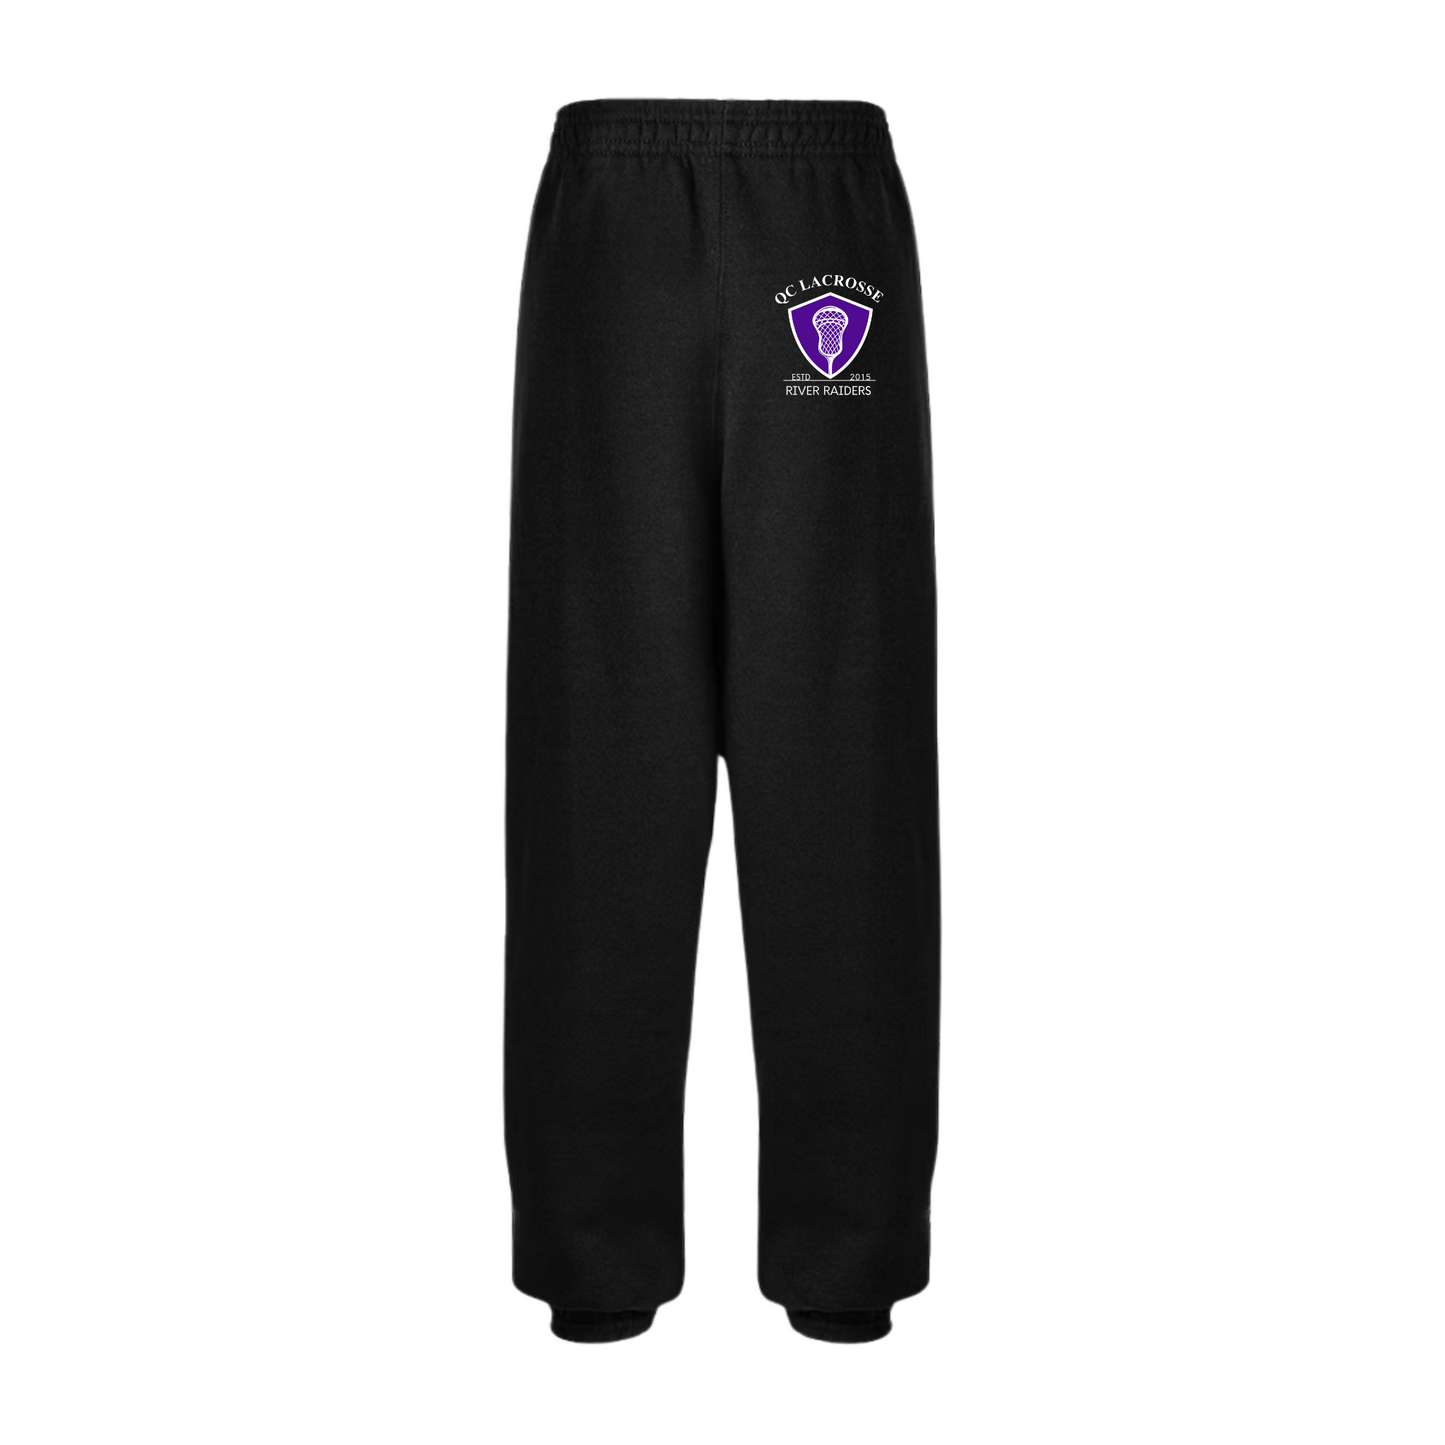 QC Lacrosse Sweatpants- Youth and Adult Sizes